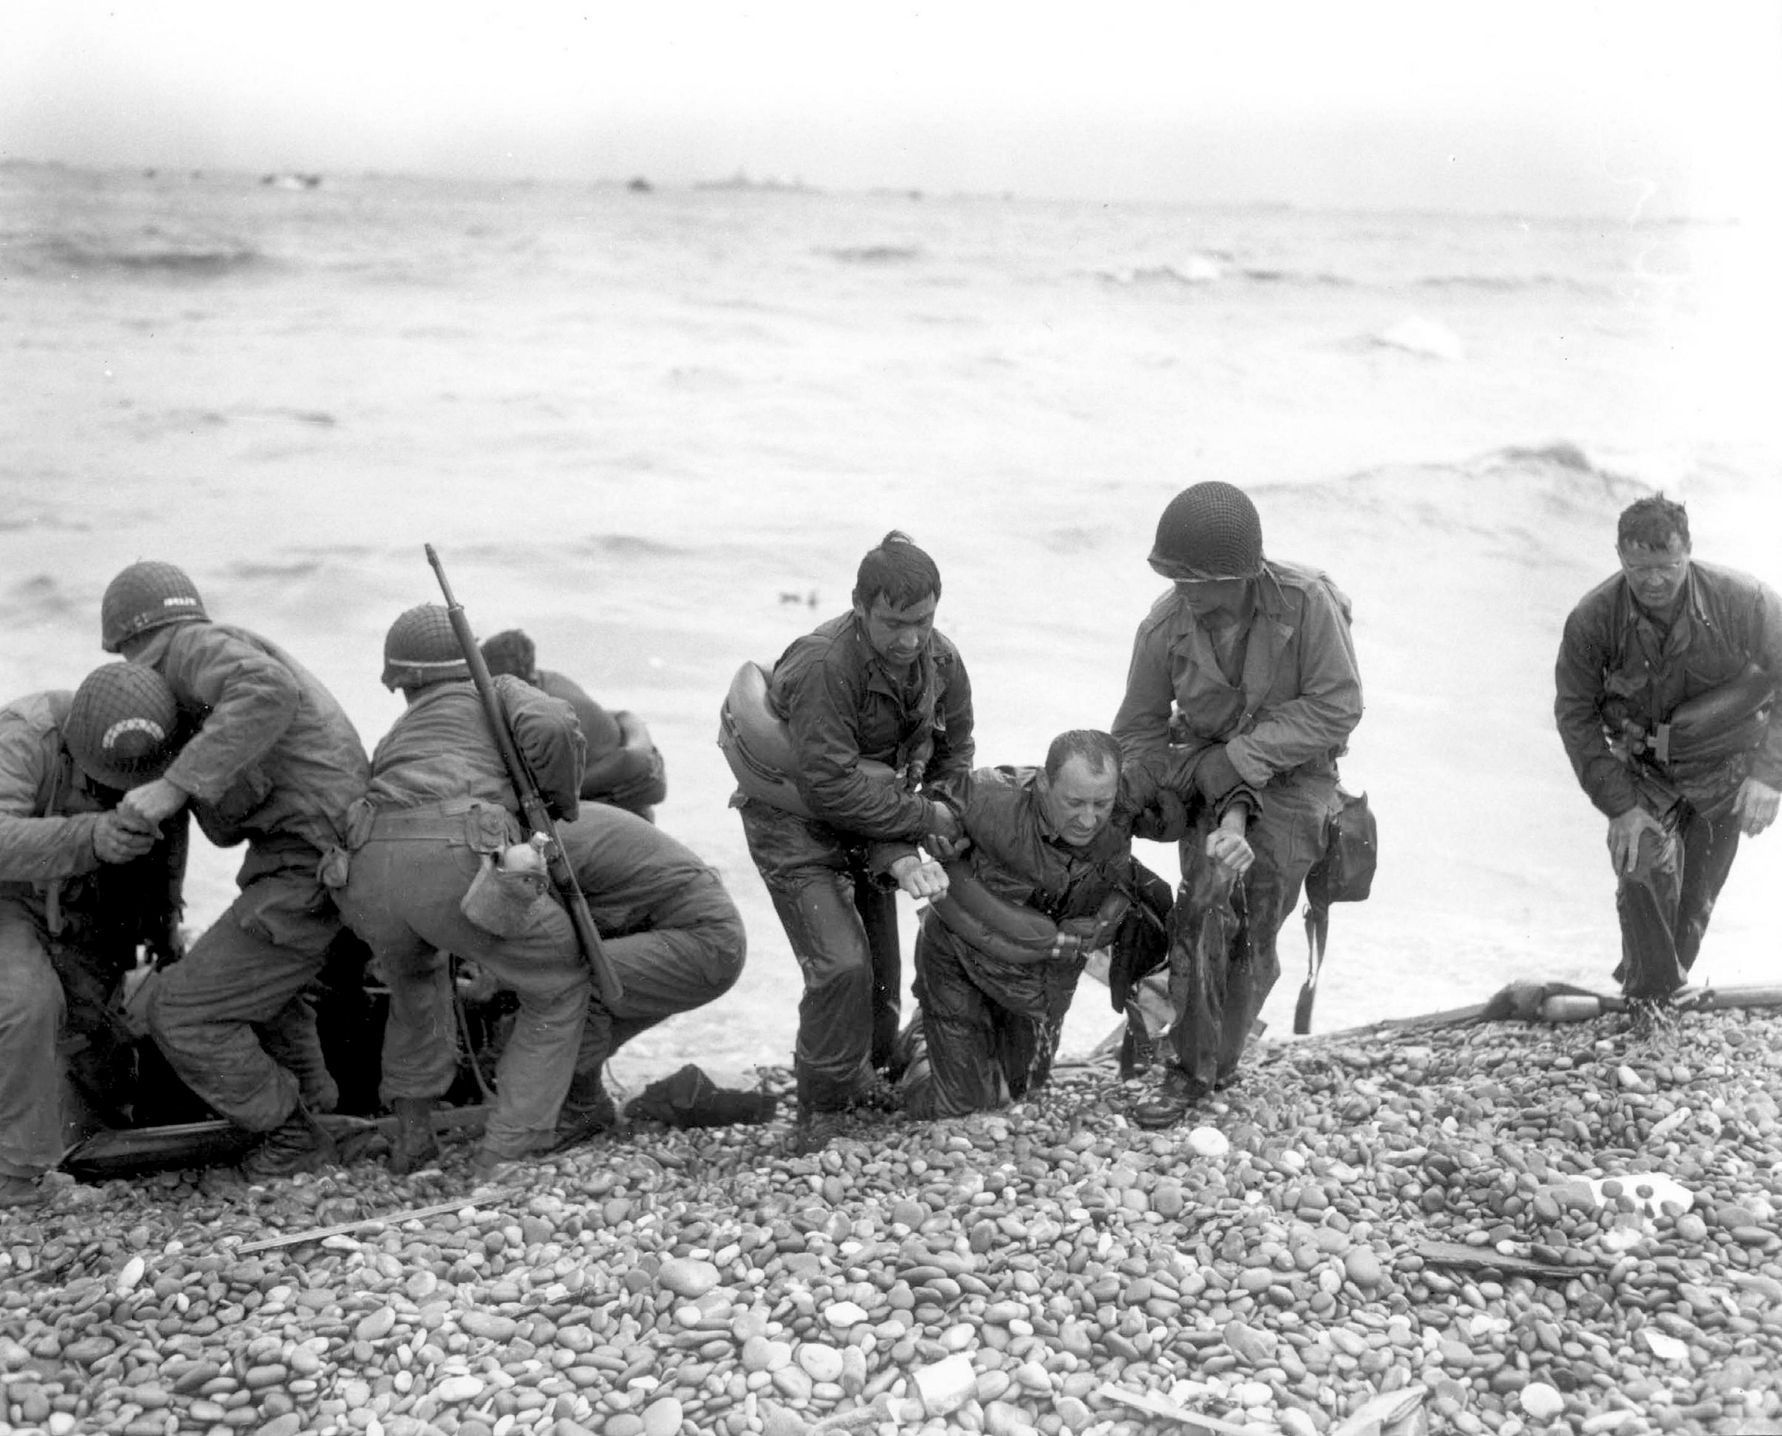 Handout photo of members of an American landing party assisting troops  near Colleville sur Mer